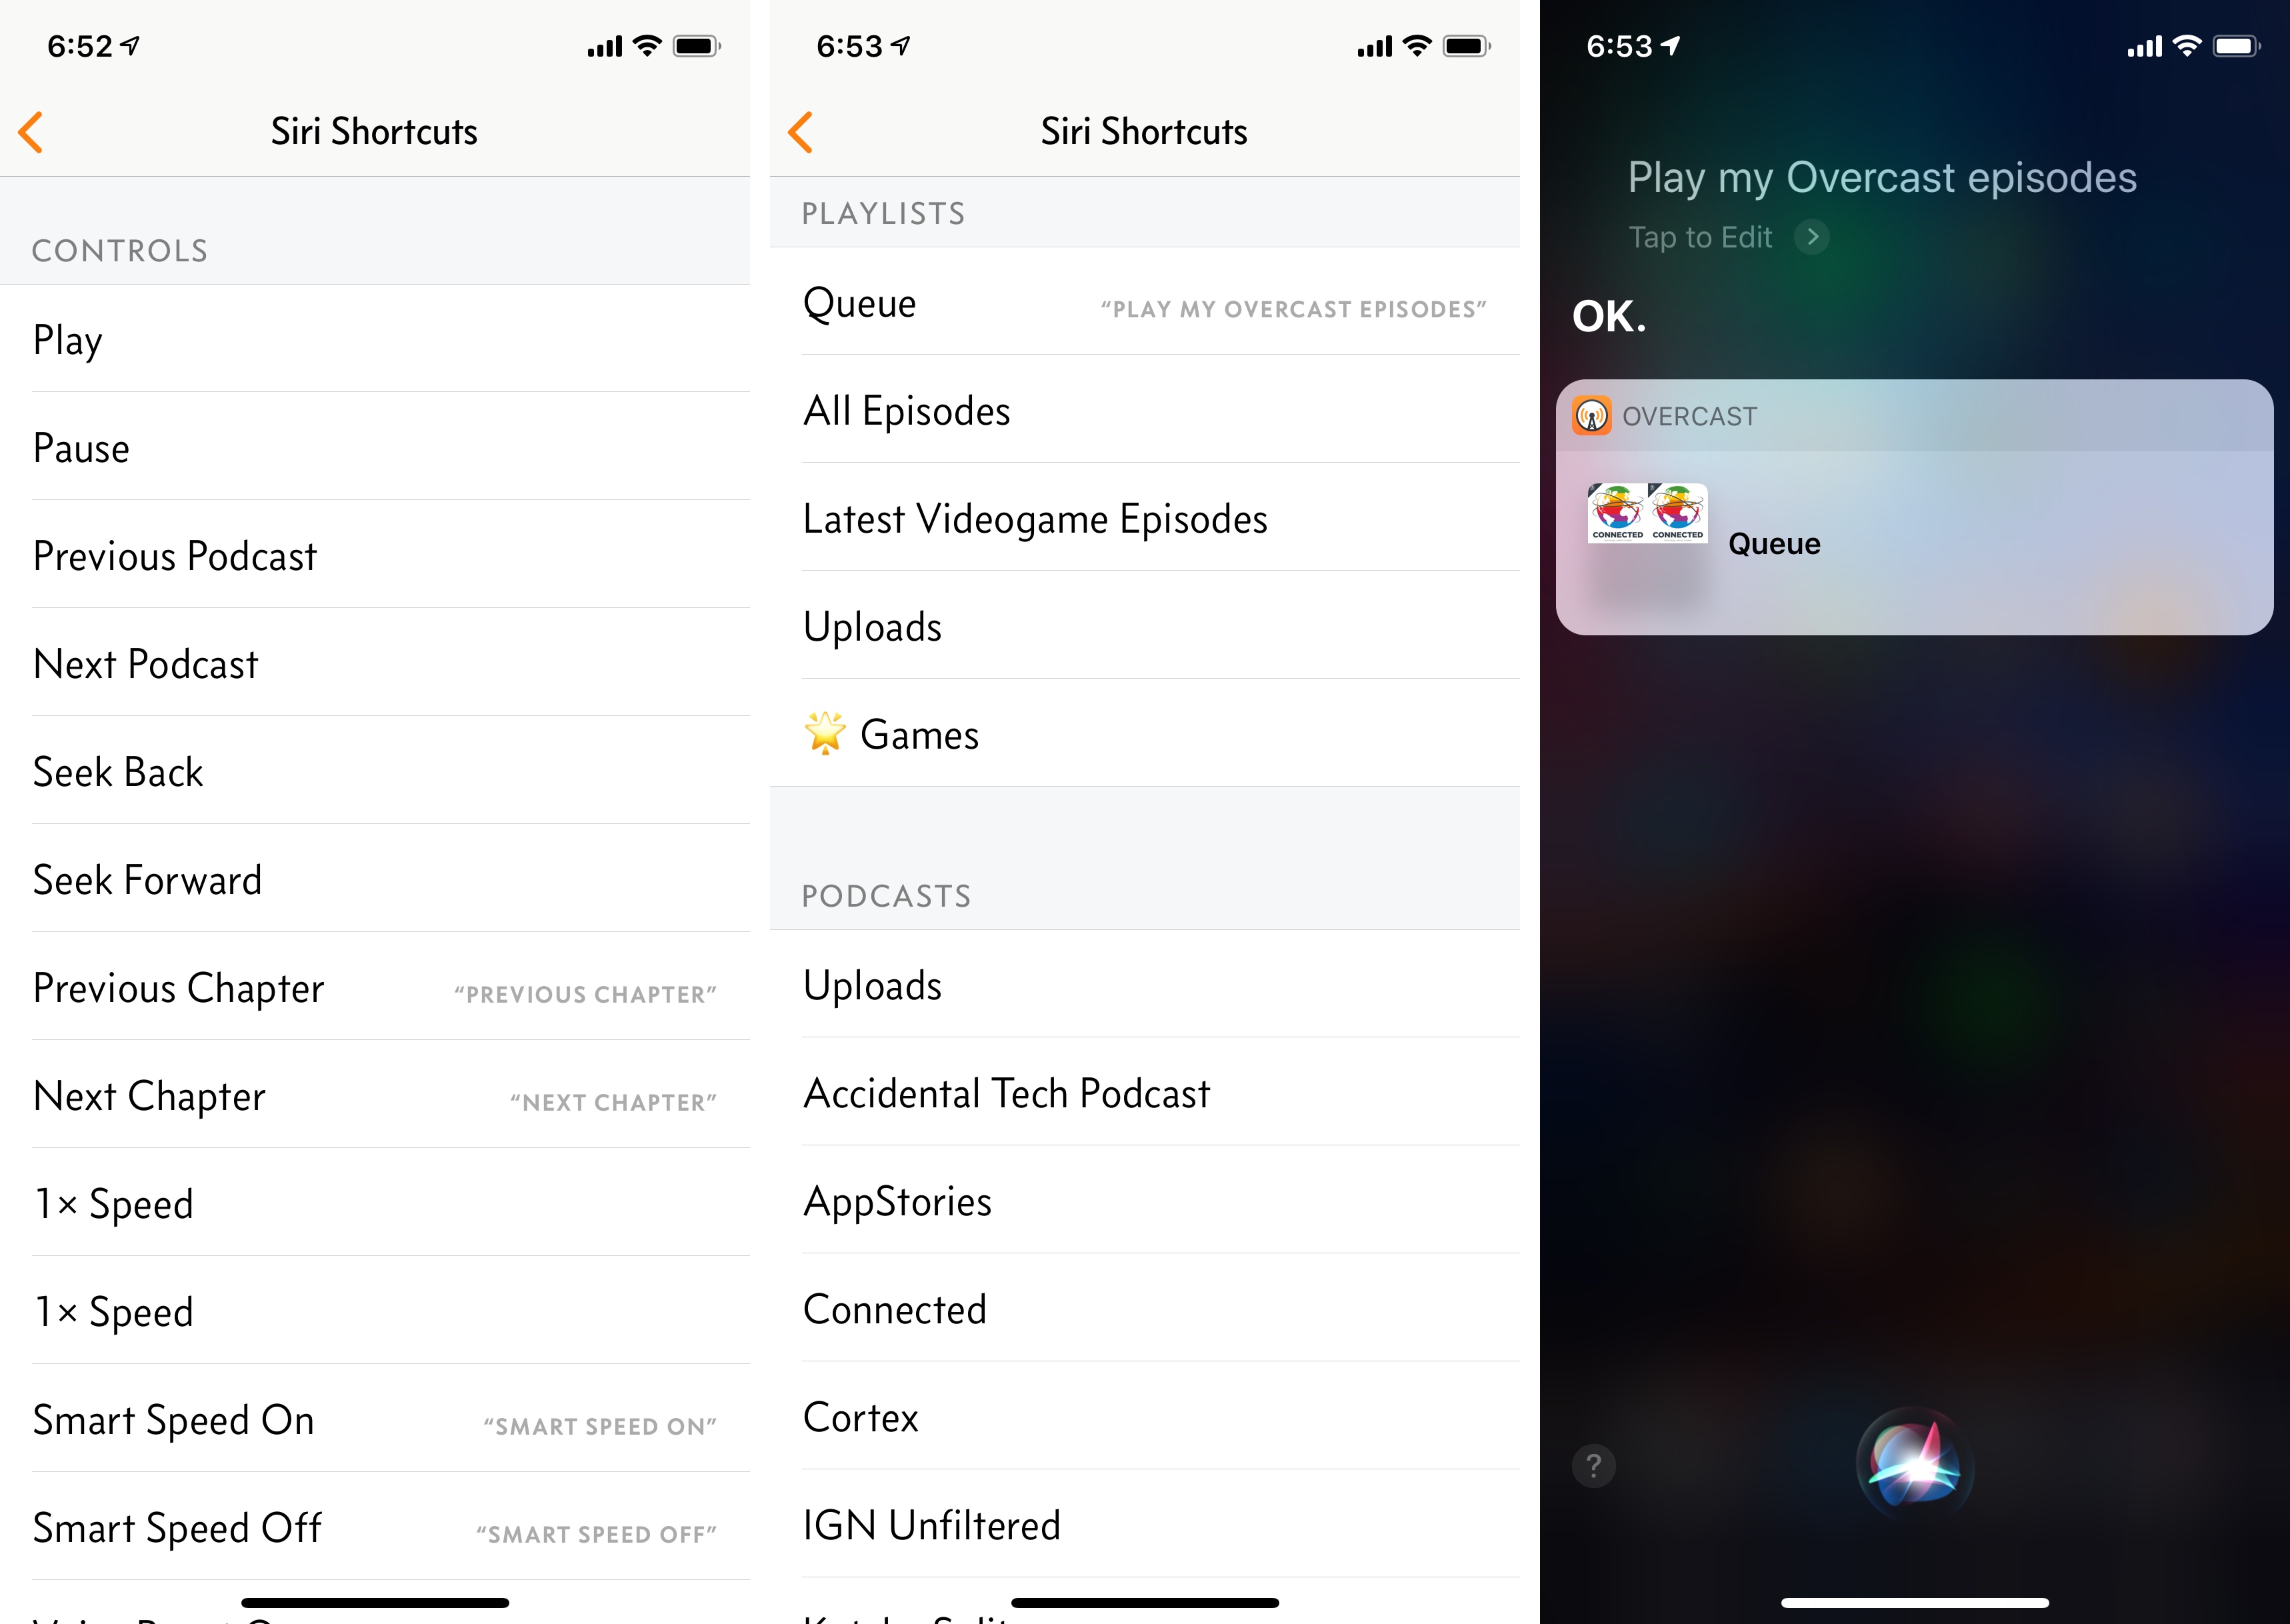 Overcast 5 supports a vast selection of app-specific shortcuts and media shortcuts.